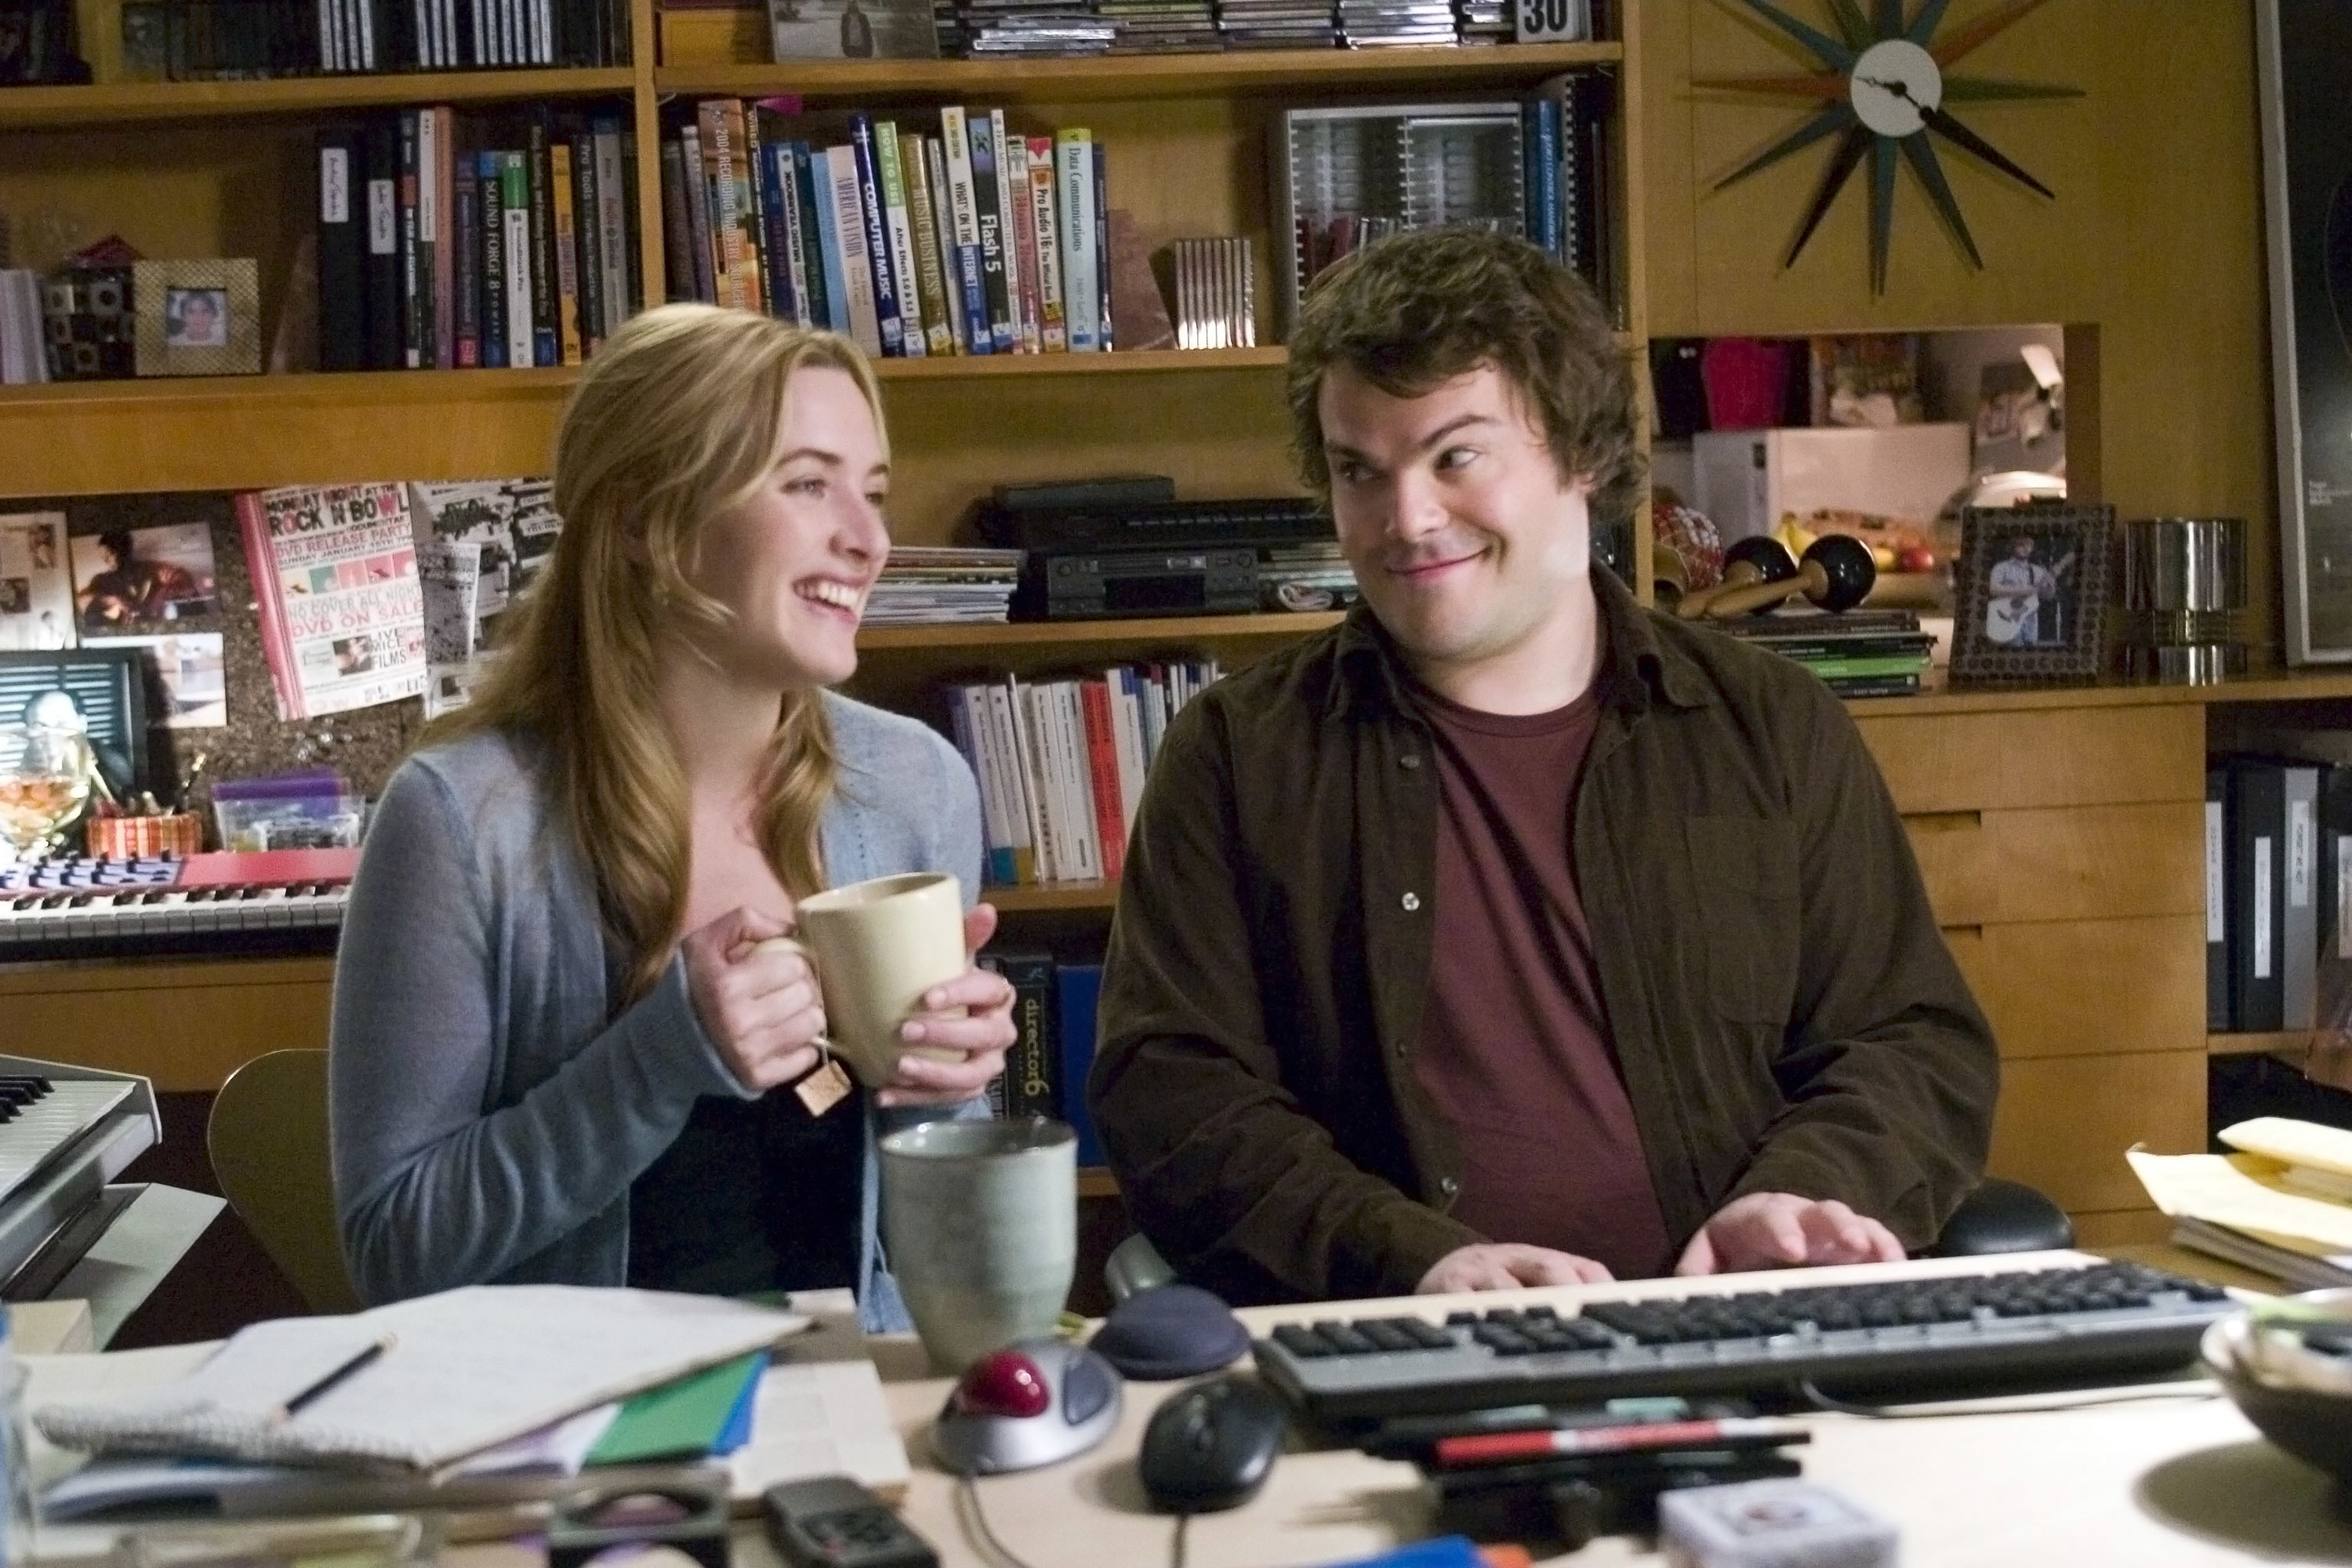 Kate Winslet and Jack Black sitting at a desk and laughing